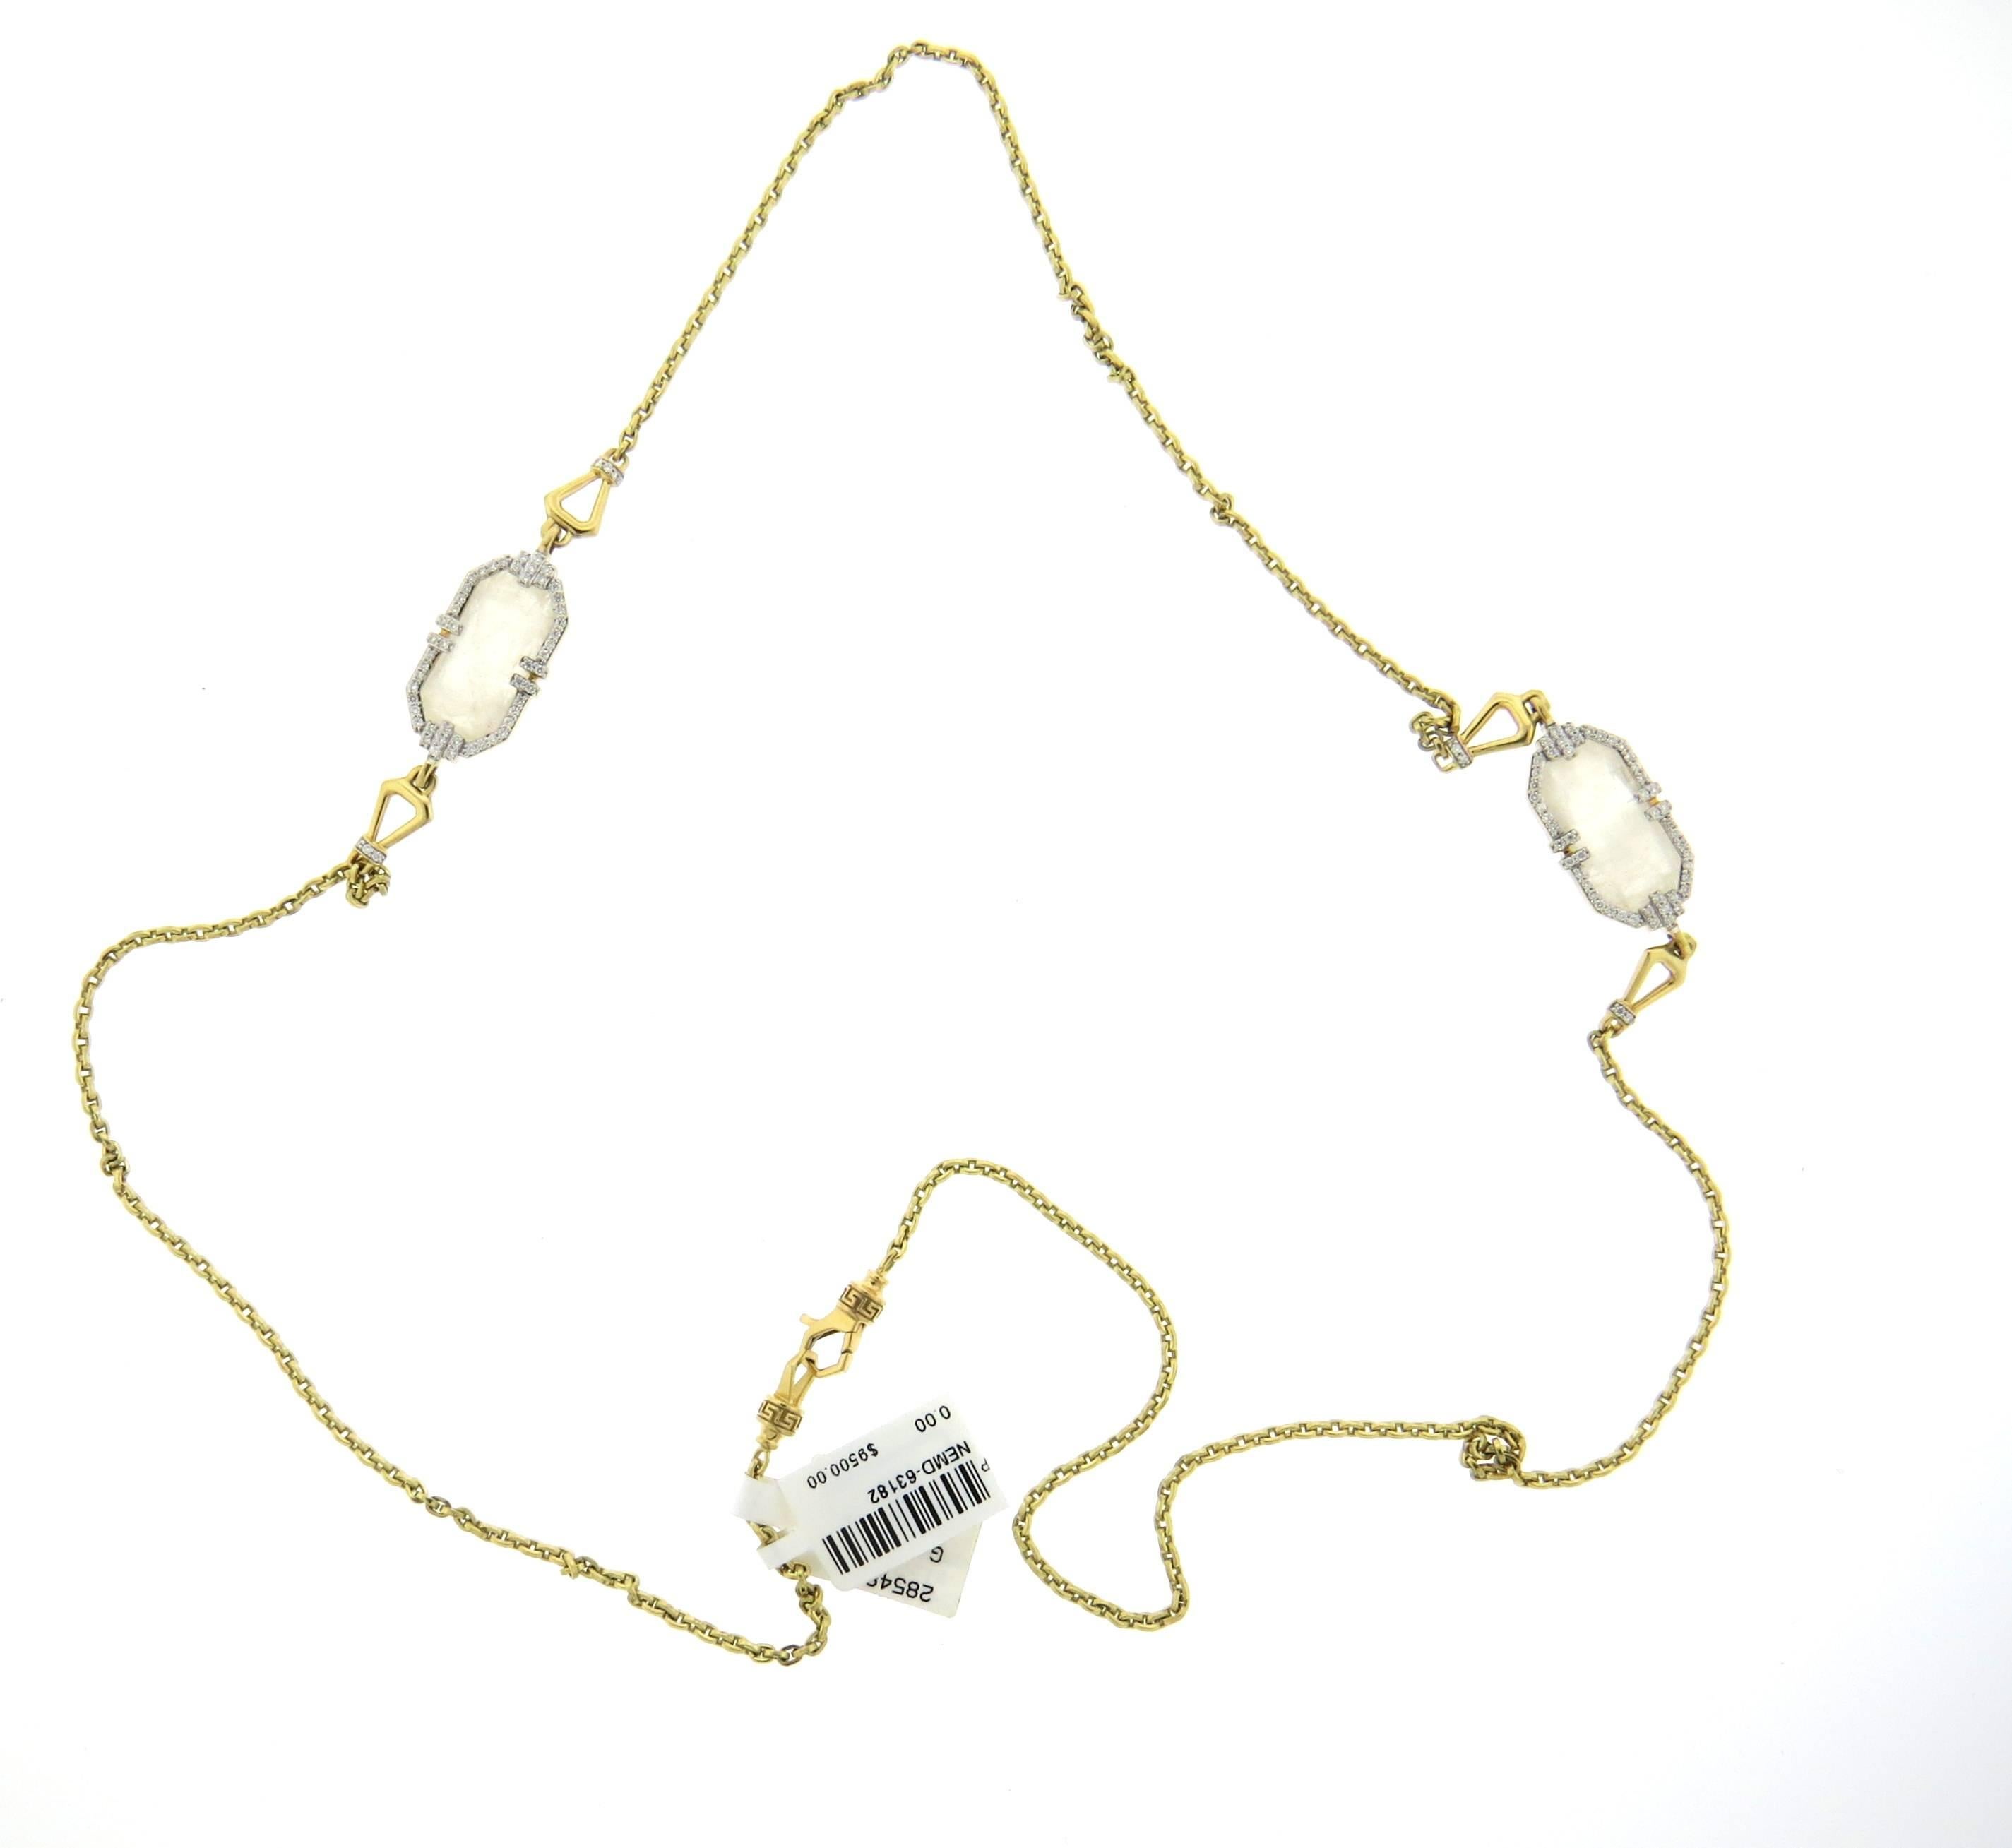 A new long 18k yellow gold necklace, crafted by Ivanka Trump, featuring white labradorite and diamond stations. Diamonds total approx. 0.75ctw. Necklace is 30 1/2